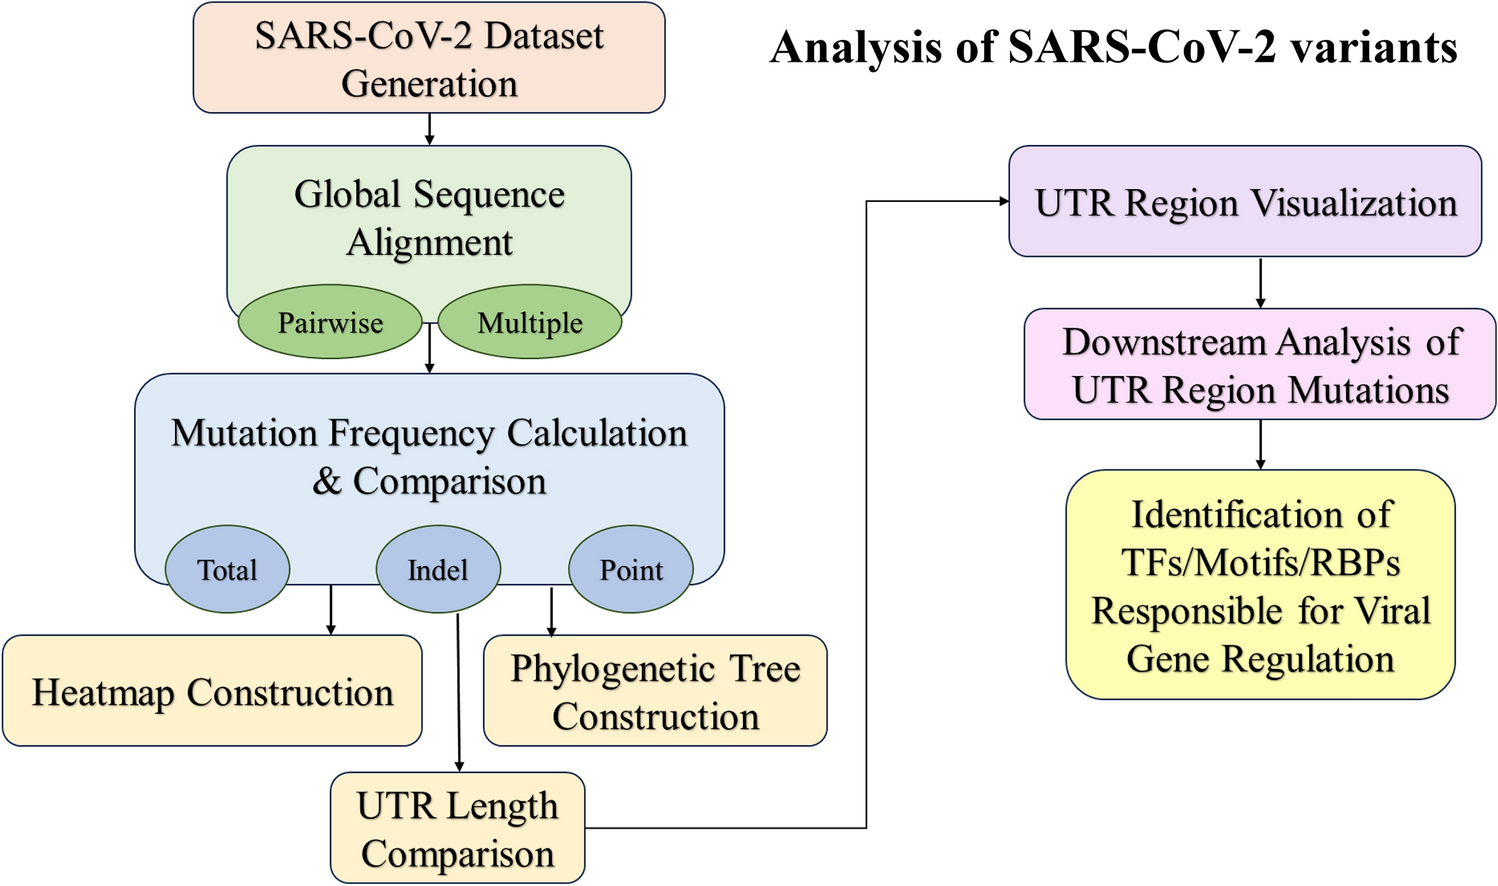 Genome-wide mutation frequency variation among SARS-CoV-2 variants and its effects on the untranslated regions